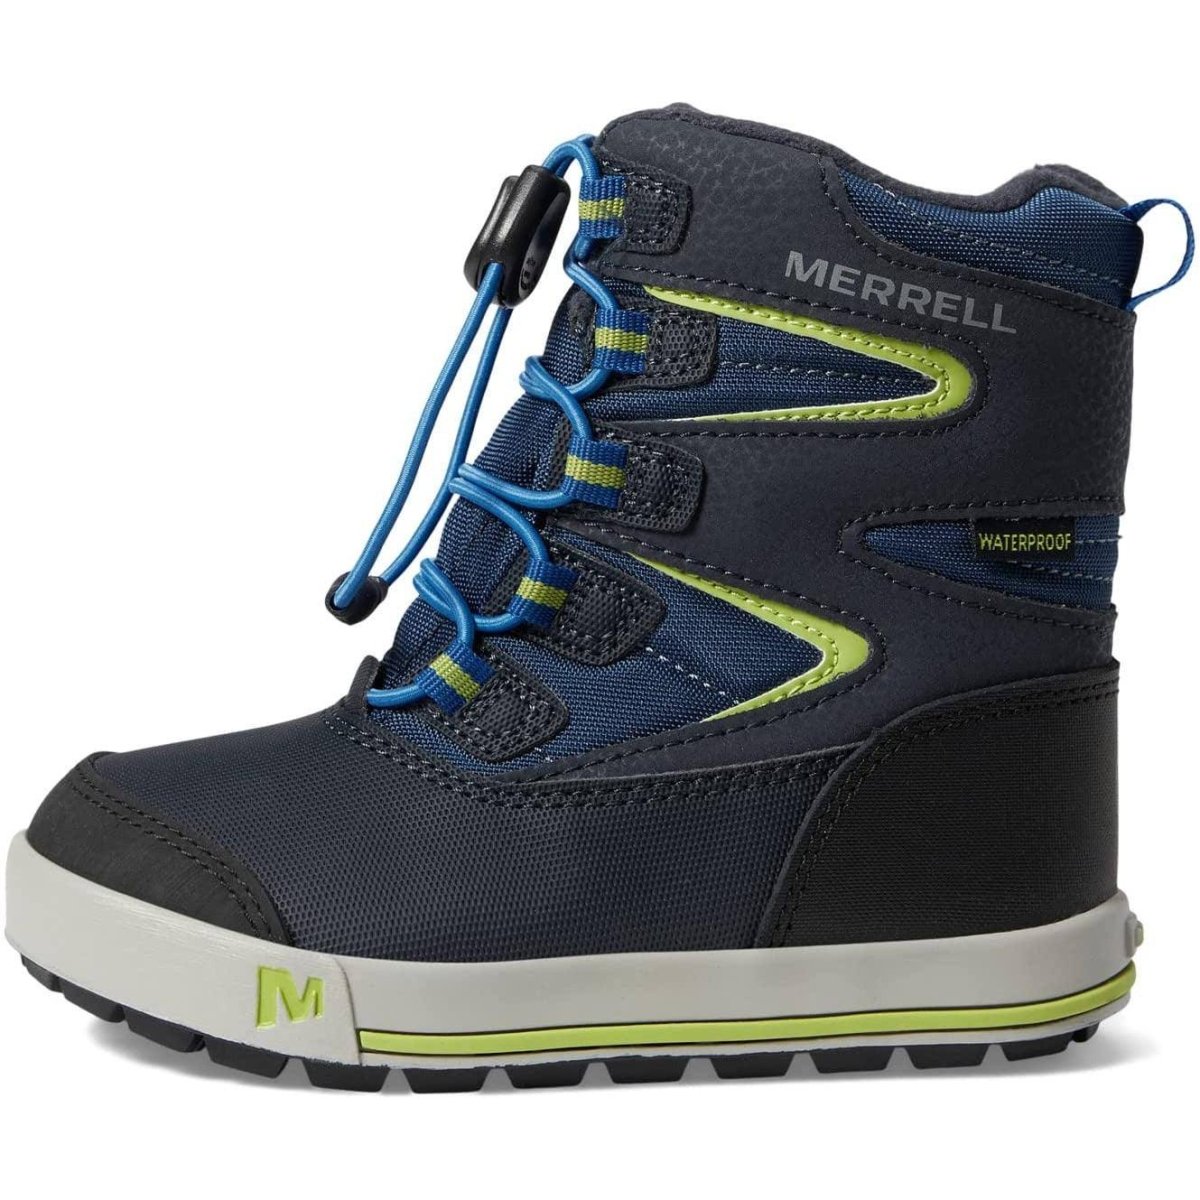 Big Kid's Snow Bank 3.0 Boot - The Shoe CollectiveMerrell